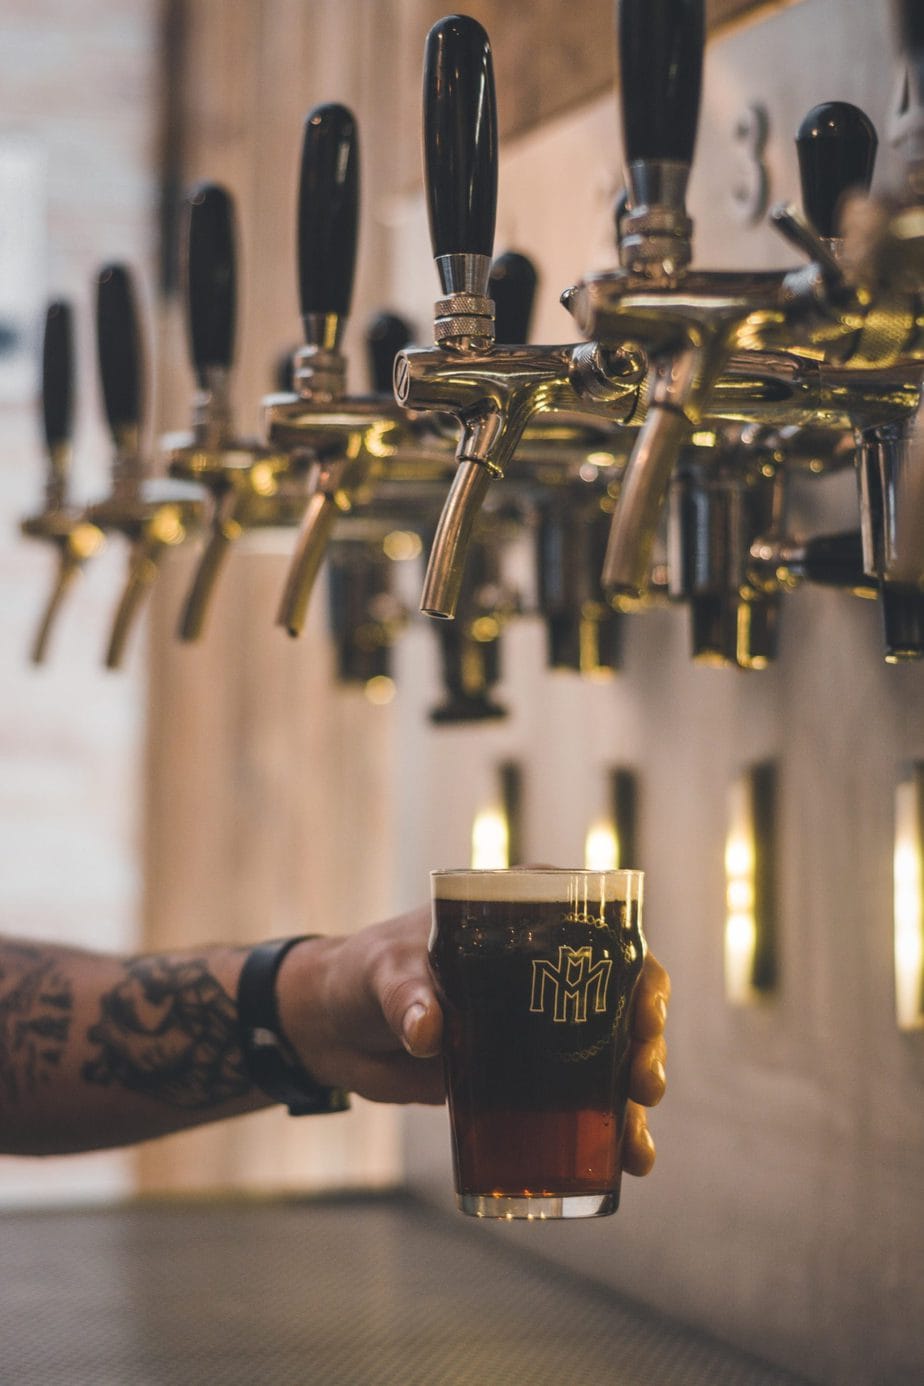 The Best Places to Buy Beer Glassware